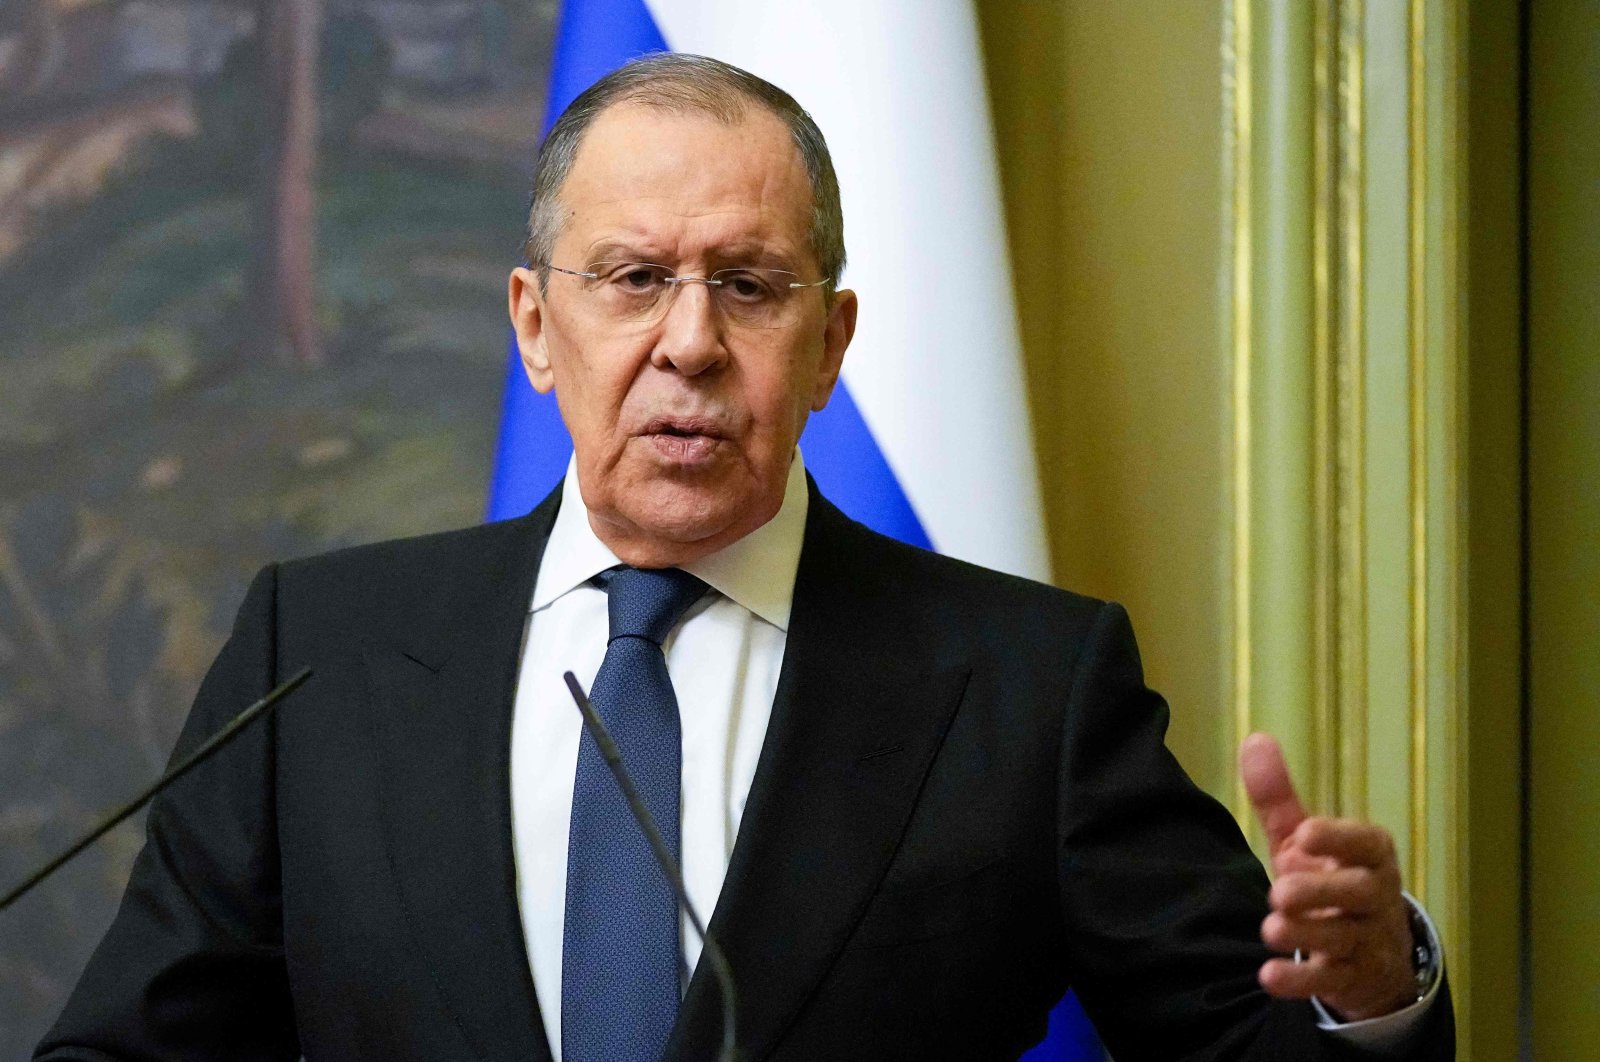 Russian Foreign Minister Sergei Lavrov gestures during a joint news conference following talks with his Armenian counterpart in Moscow, Russia, April 8, 2022. (AFP Photo)